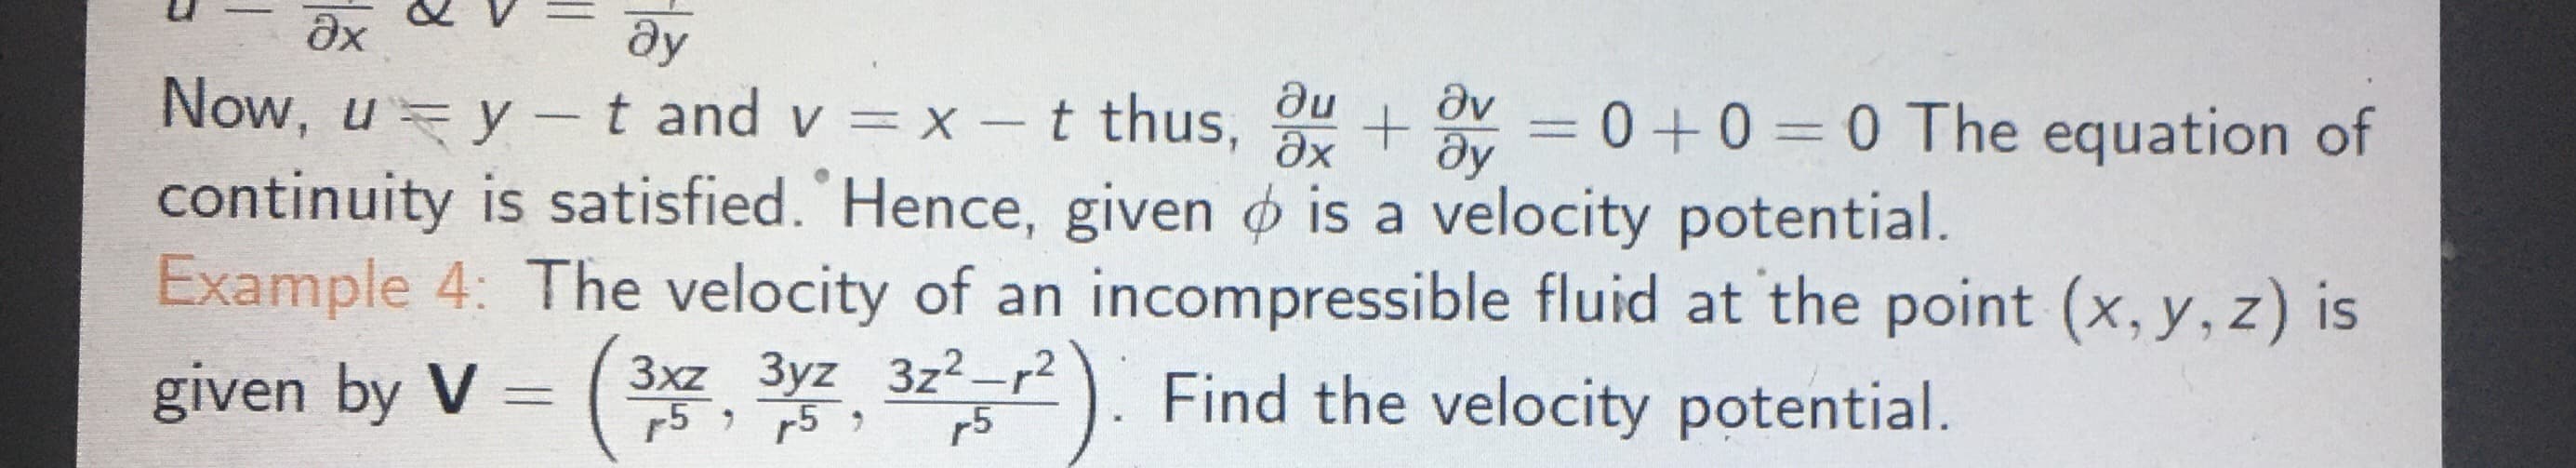 Example 4: The velocity of an incompressible fluid at the point (x, y, z) is
given by V = ( 3x 3yz 3zr). Find the velocity potential.
5 5
r5
